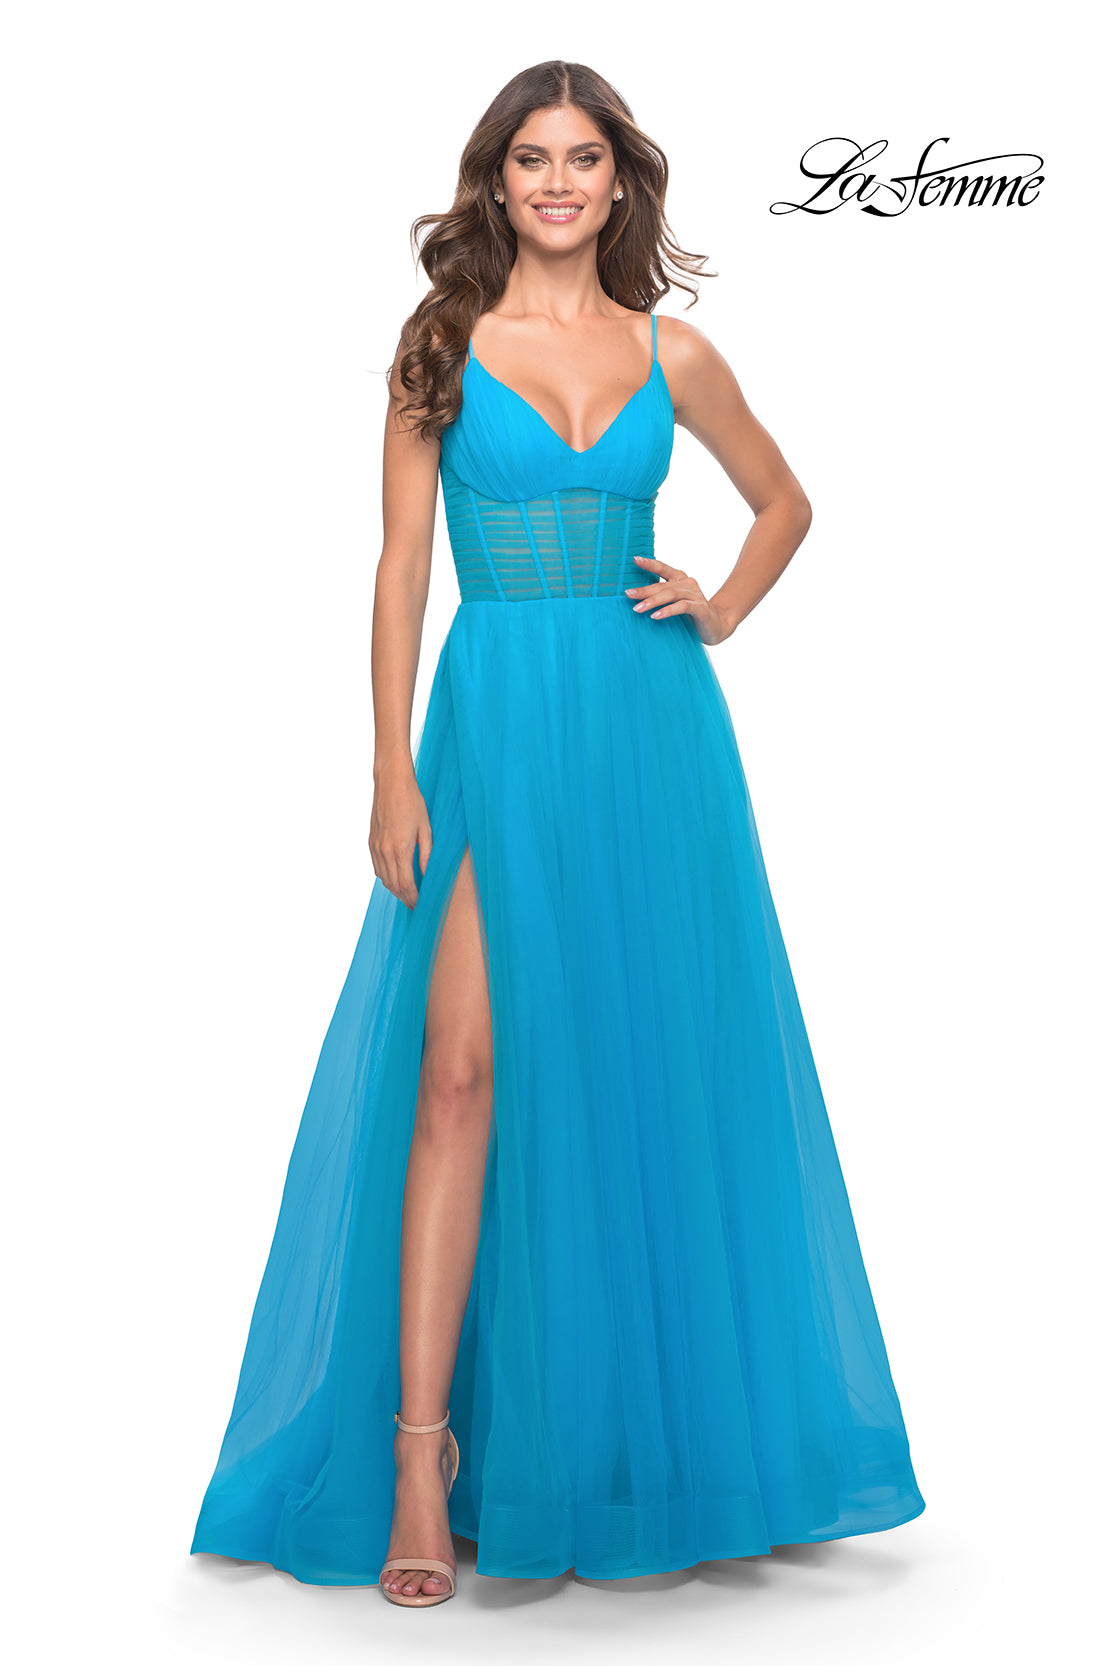 Exquisite Tulle A-Line Dress